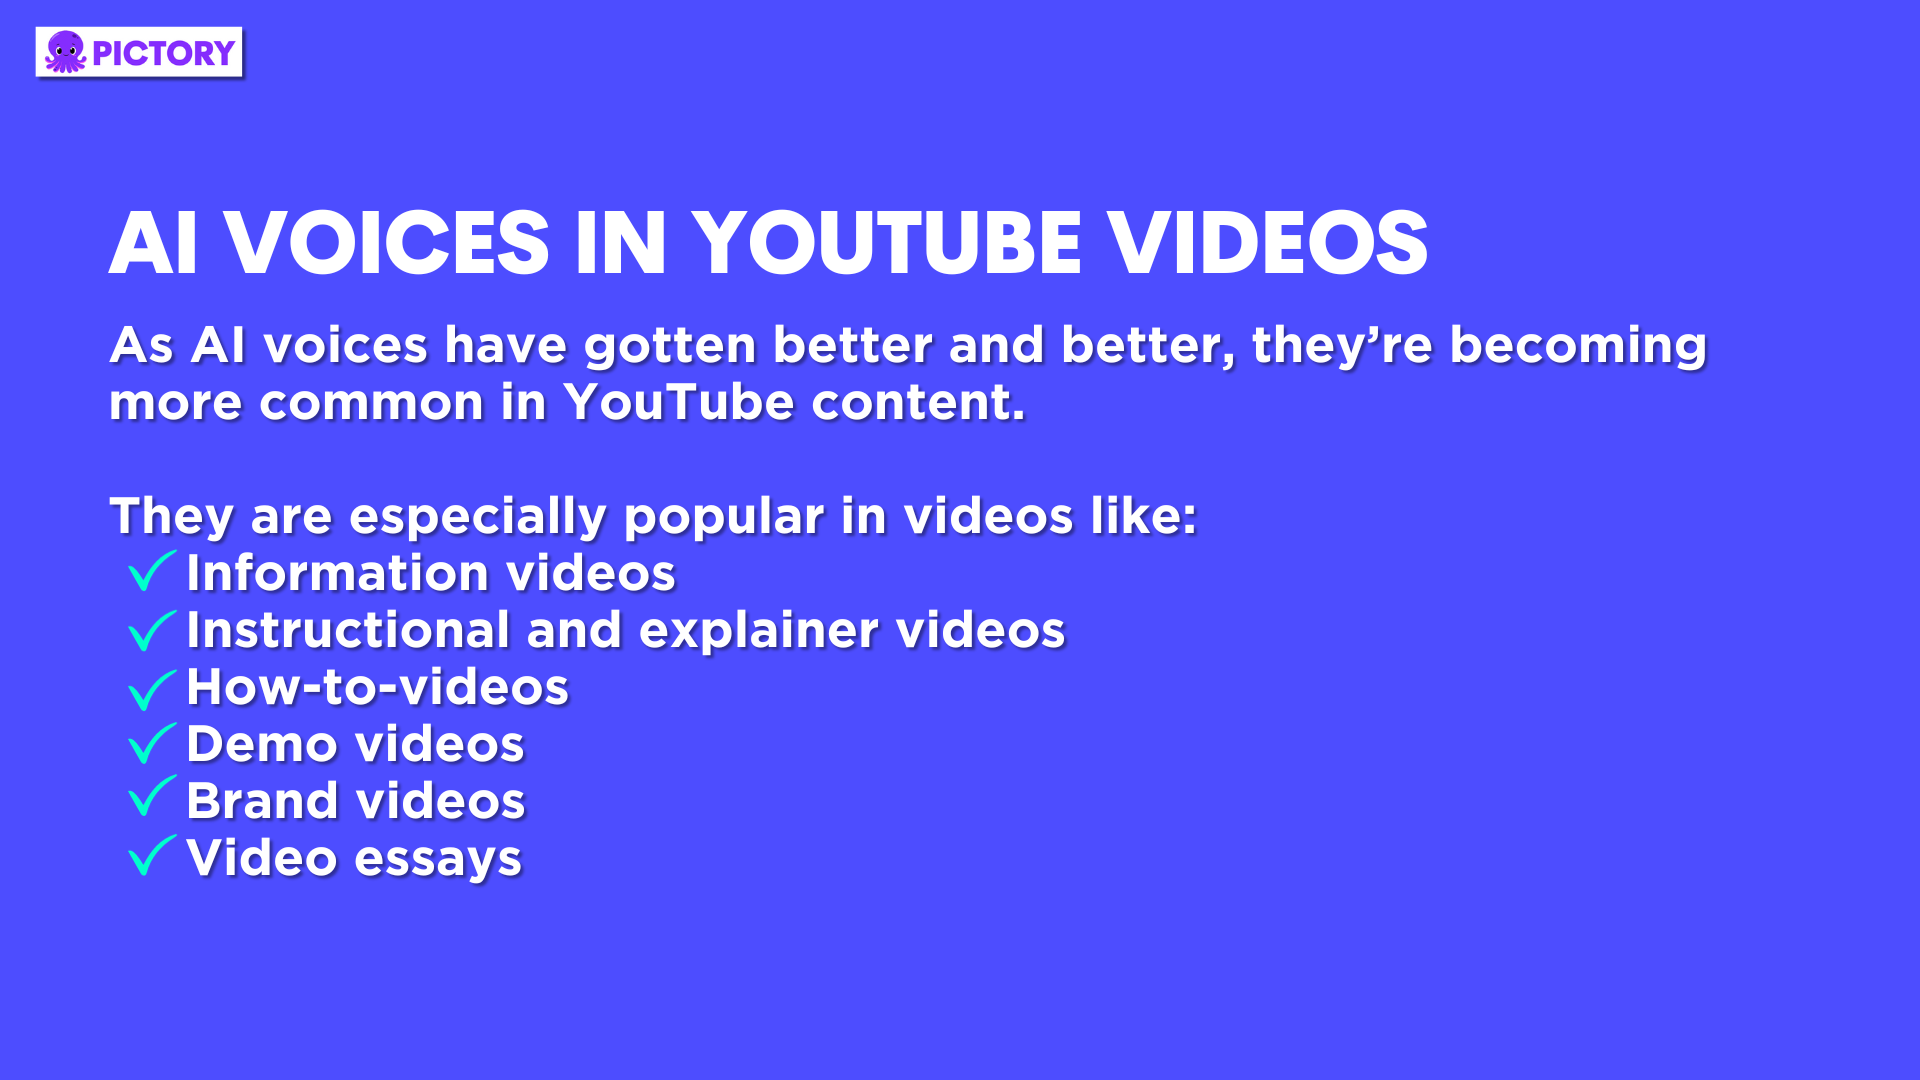 Infographic of which types of videos are good for AI voices